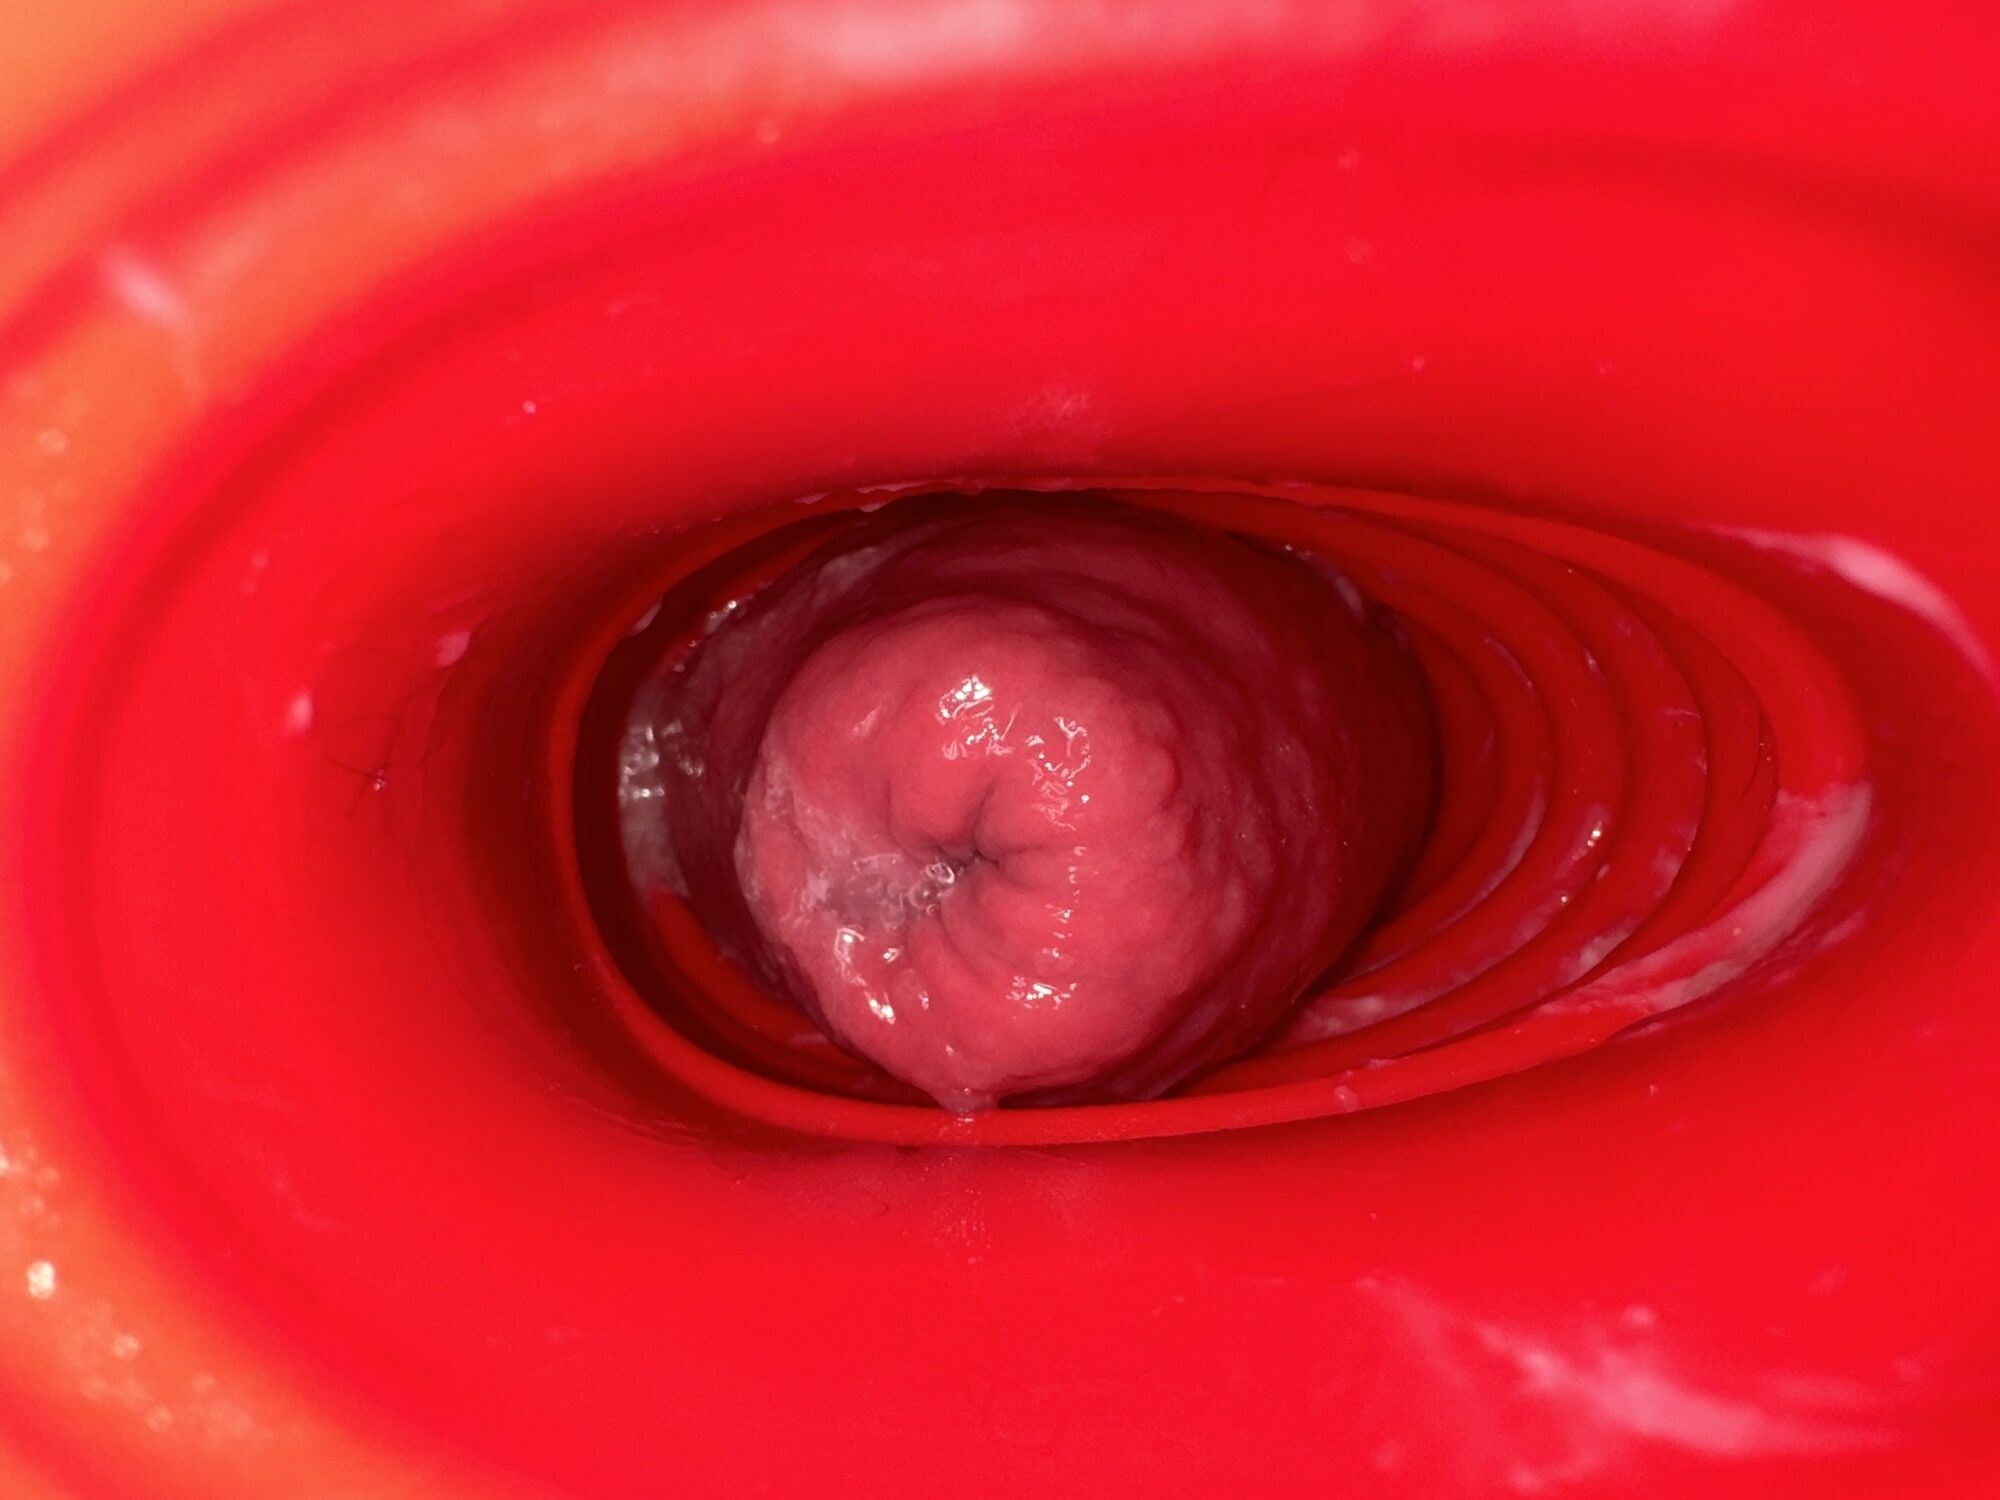 Anal prolapse in oxball ff pighole #7